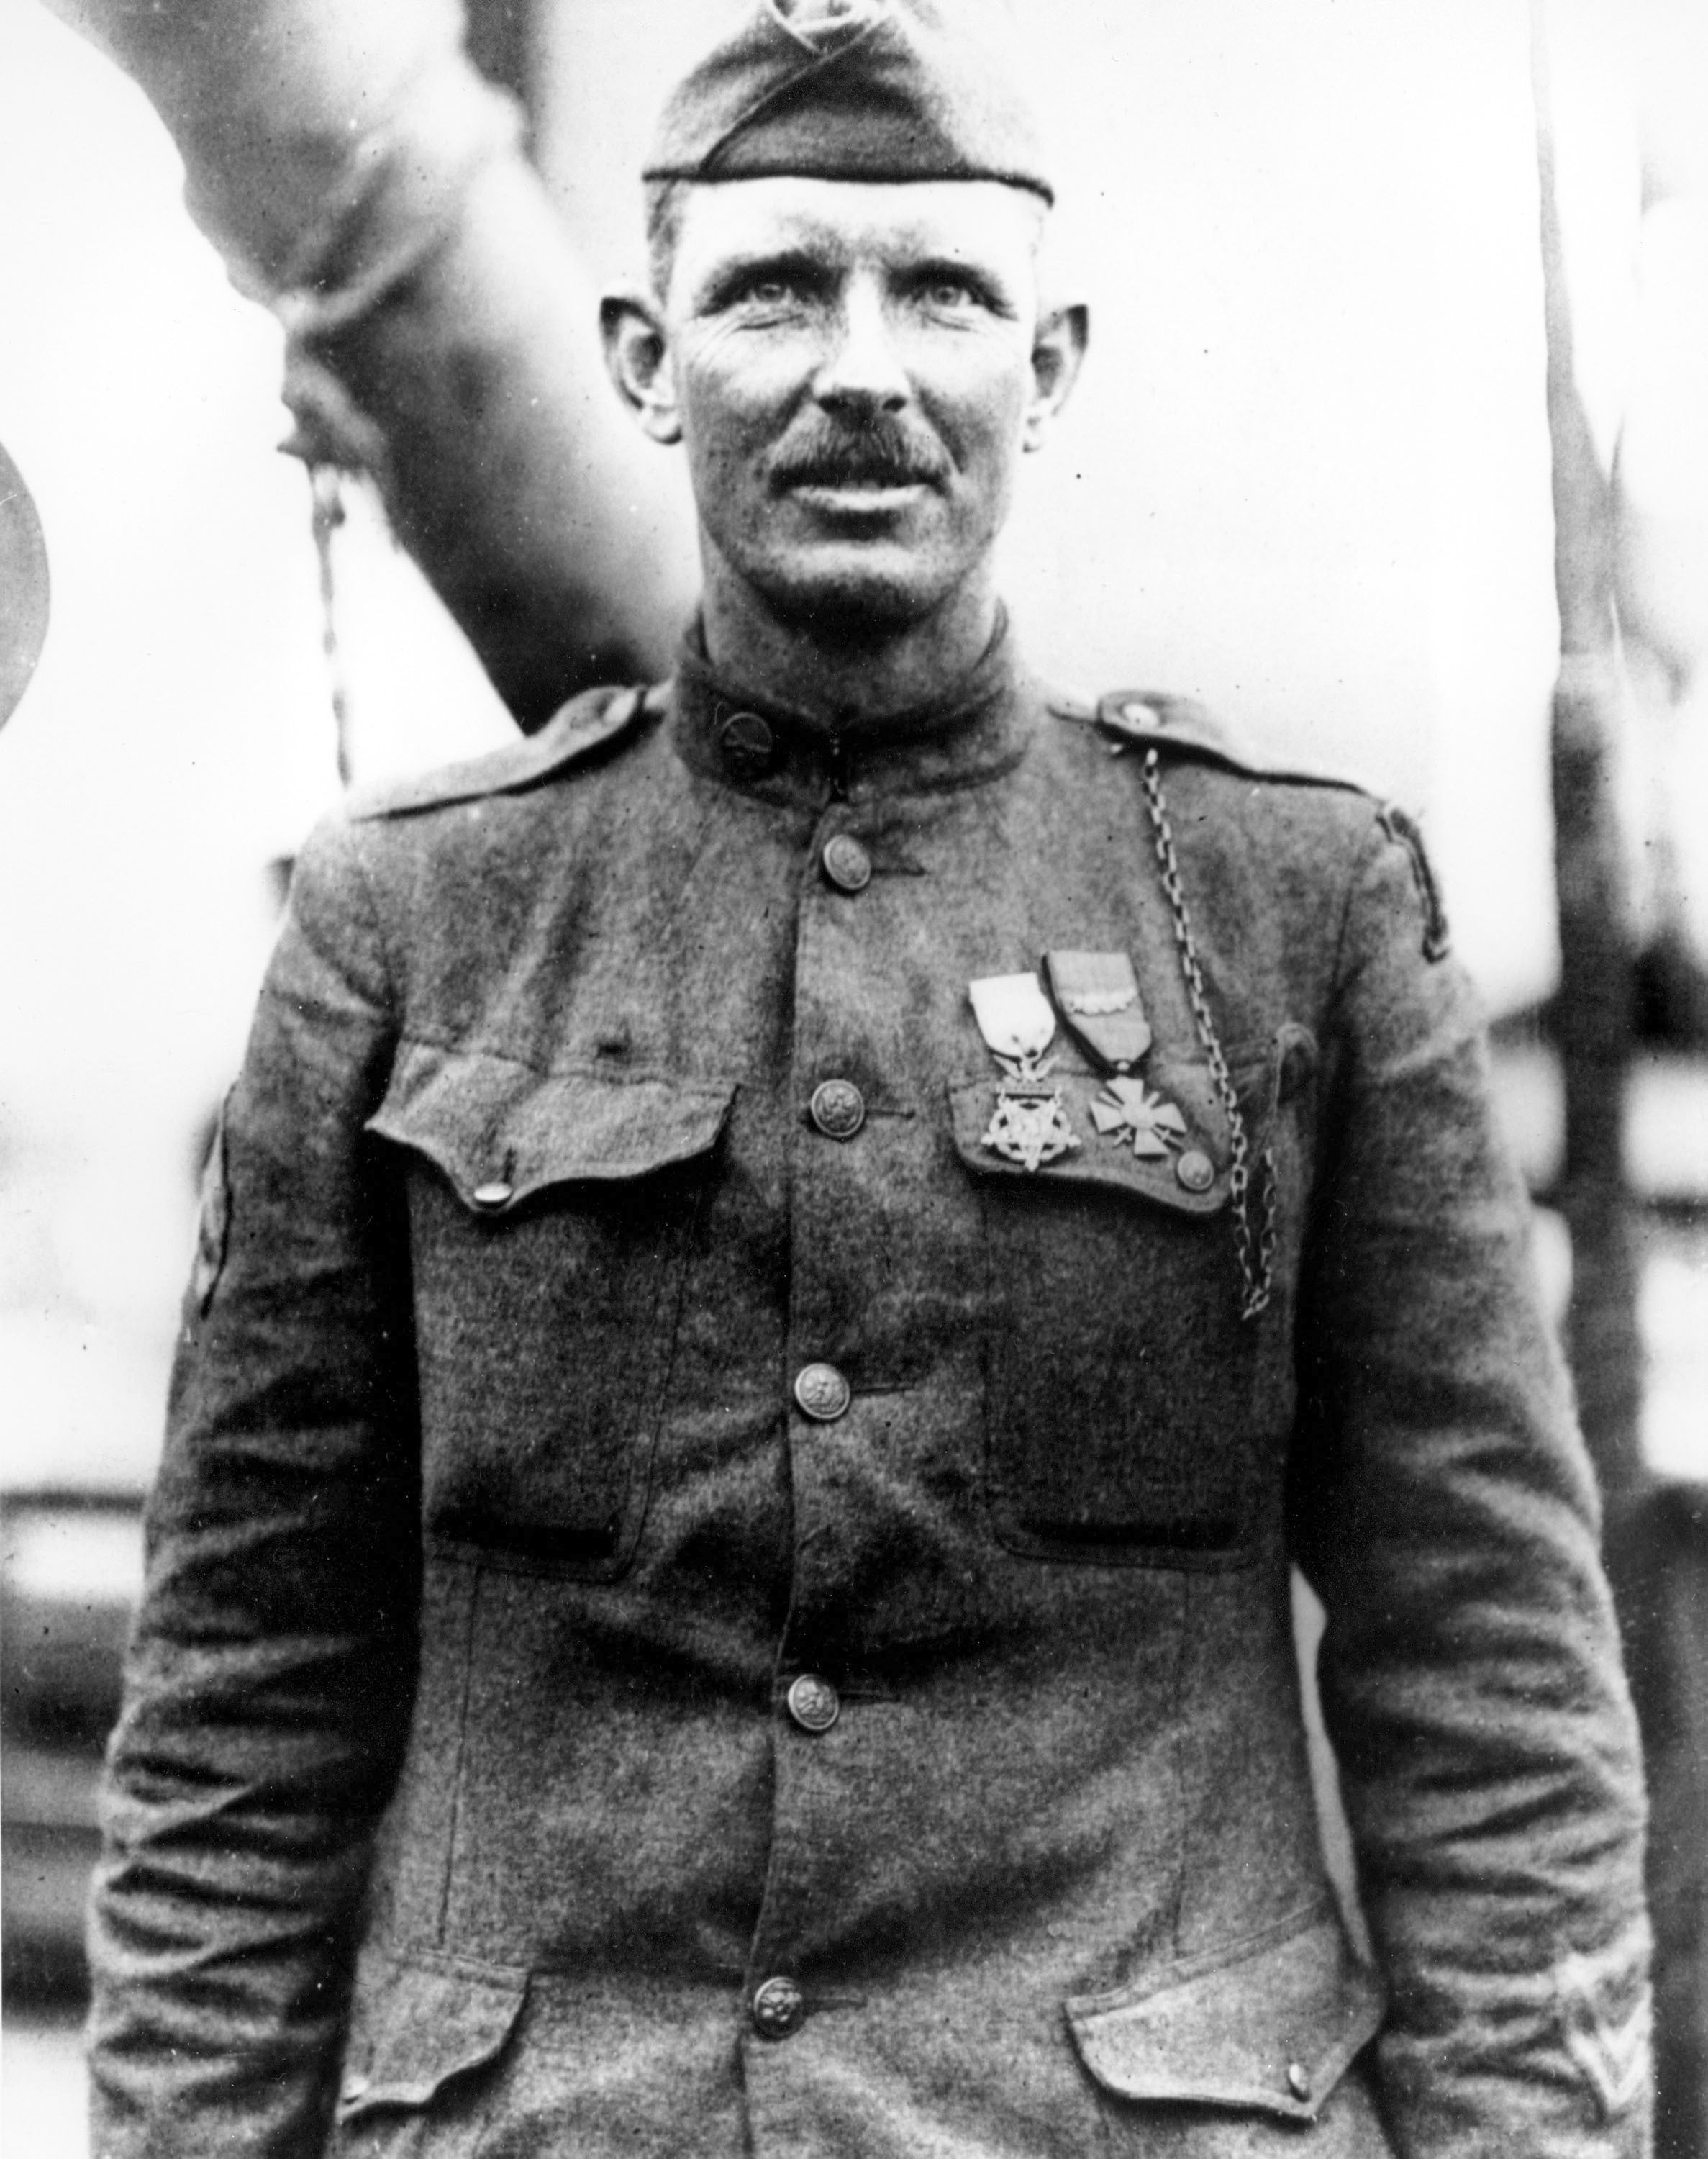 This 1919 photo provided by the Department of the US Army, shows Sgt Alvin York of the US Army in an unknown location